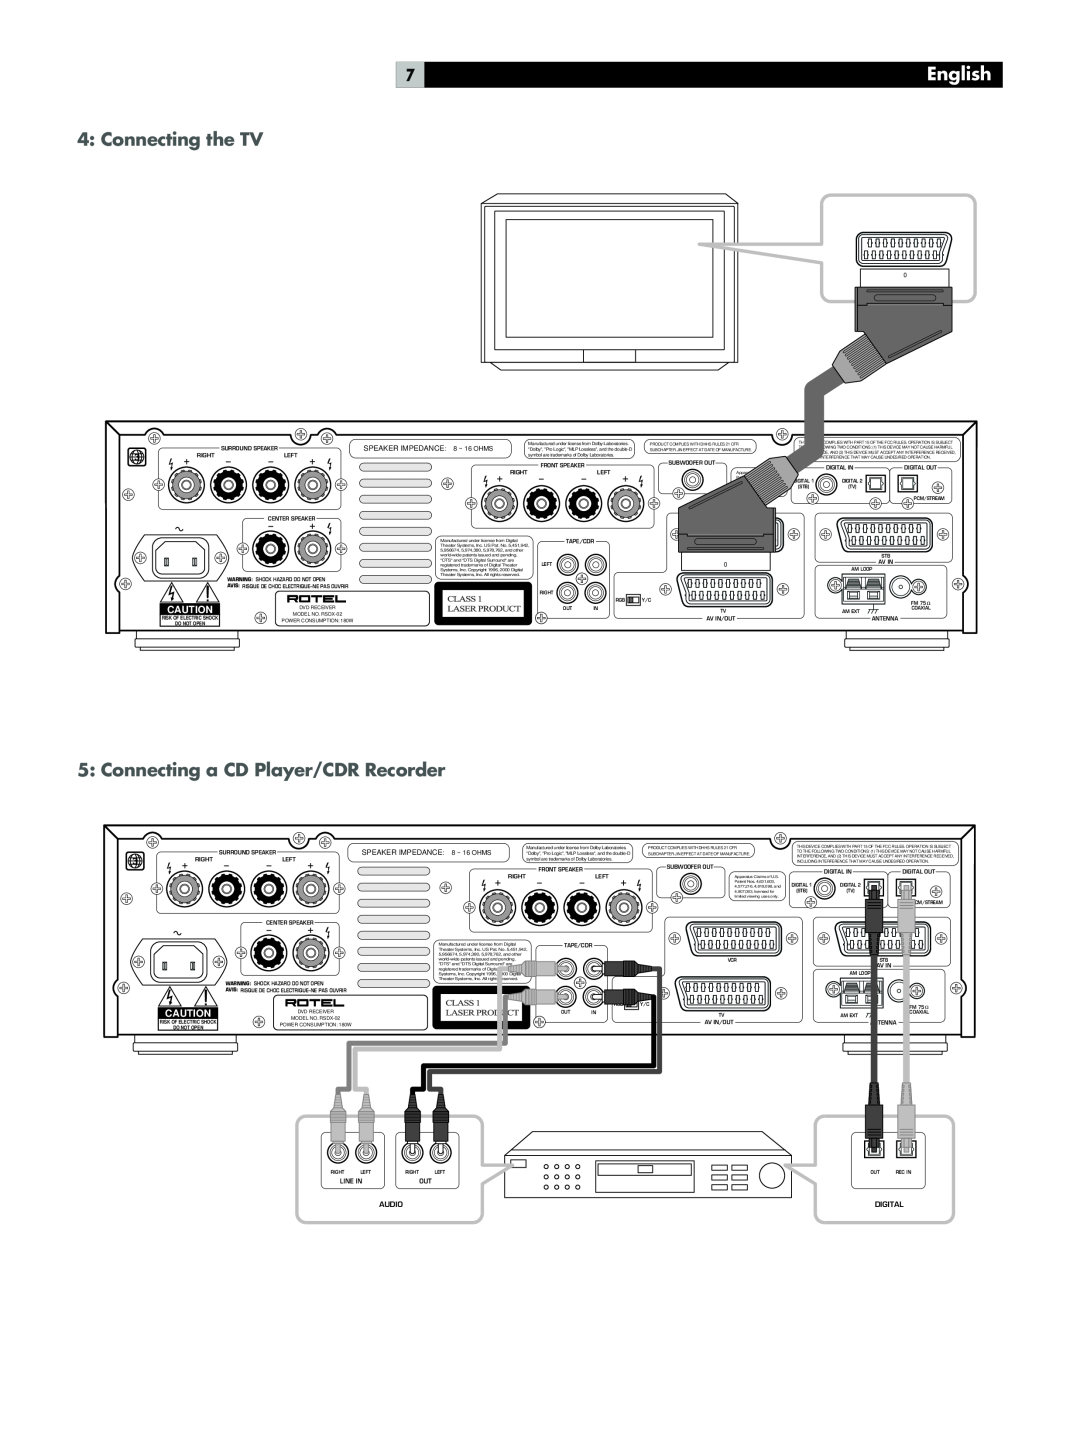 Rotel RSDX-02e Connecting the TV, Connecting a CD Player/CDR Recorder, English, SPEAKER IMPEDANCE 8 ~ 16 OHMS, Line In 